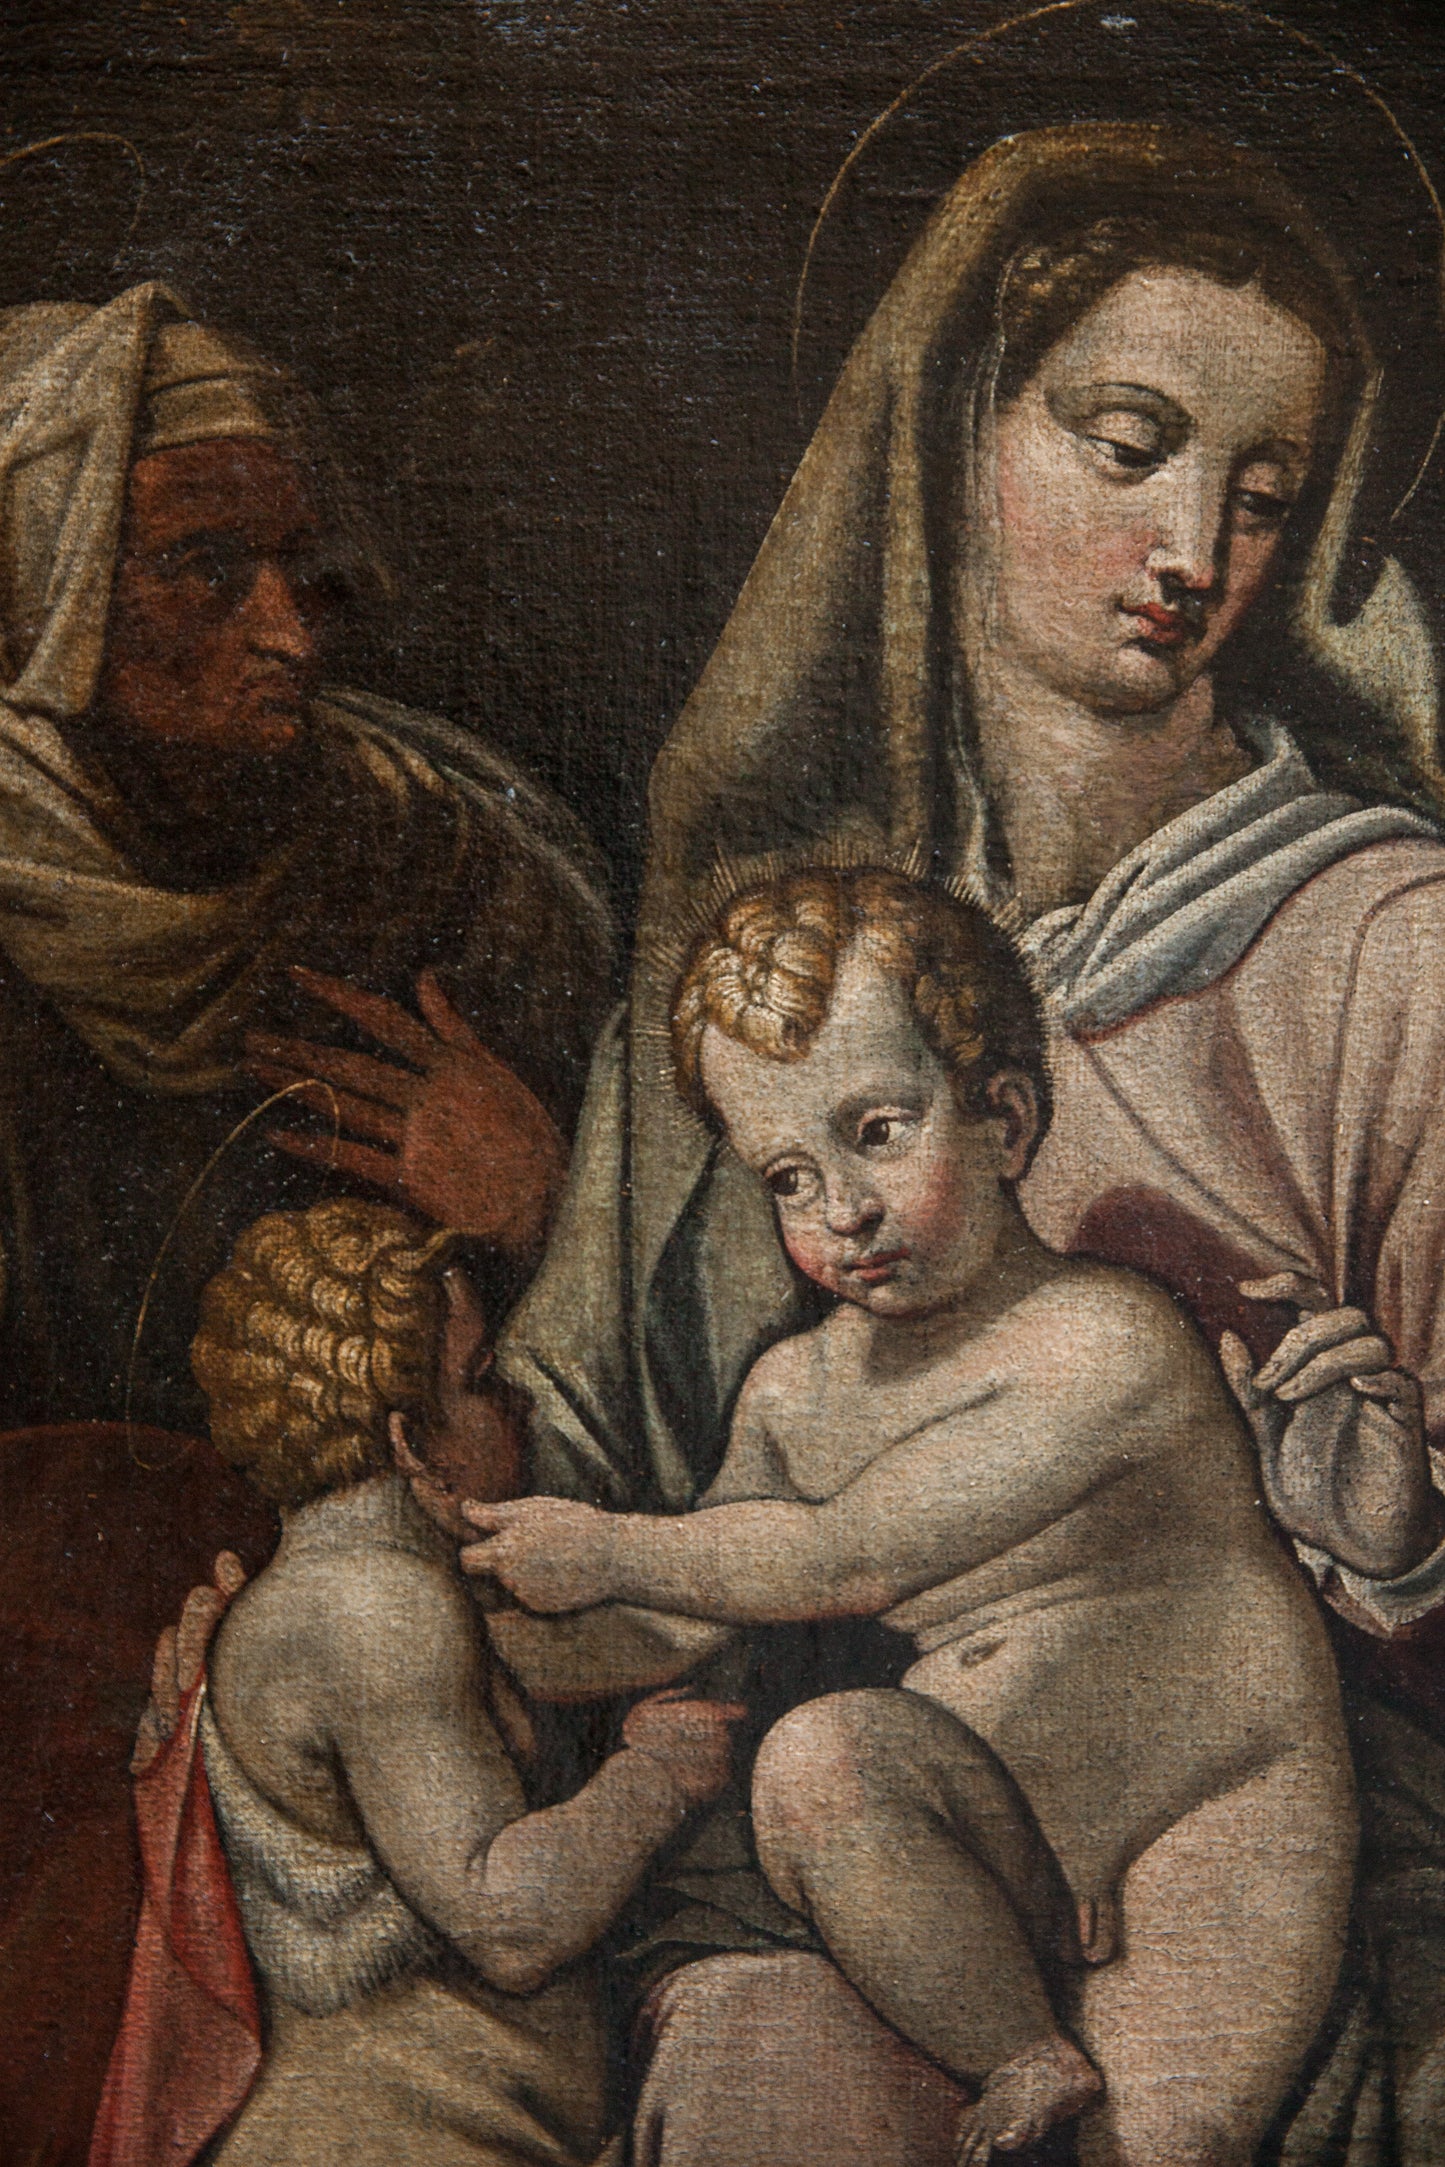 Tuscan school. Circa 1600. The Holy family with St. Joseph and St. Anna